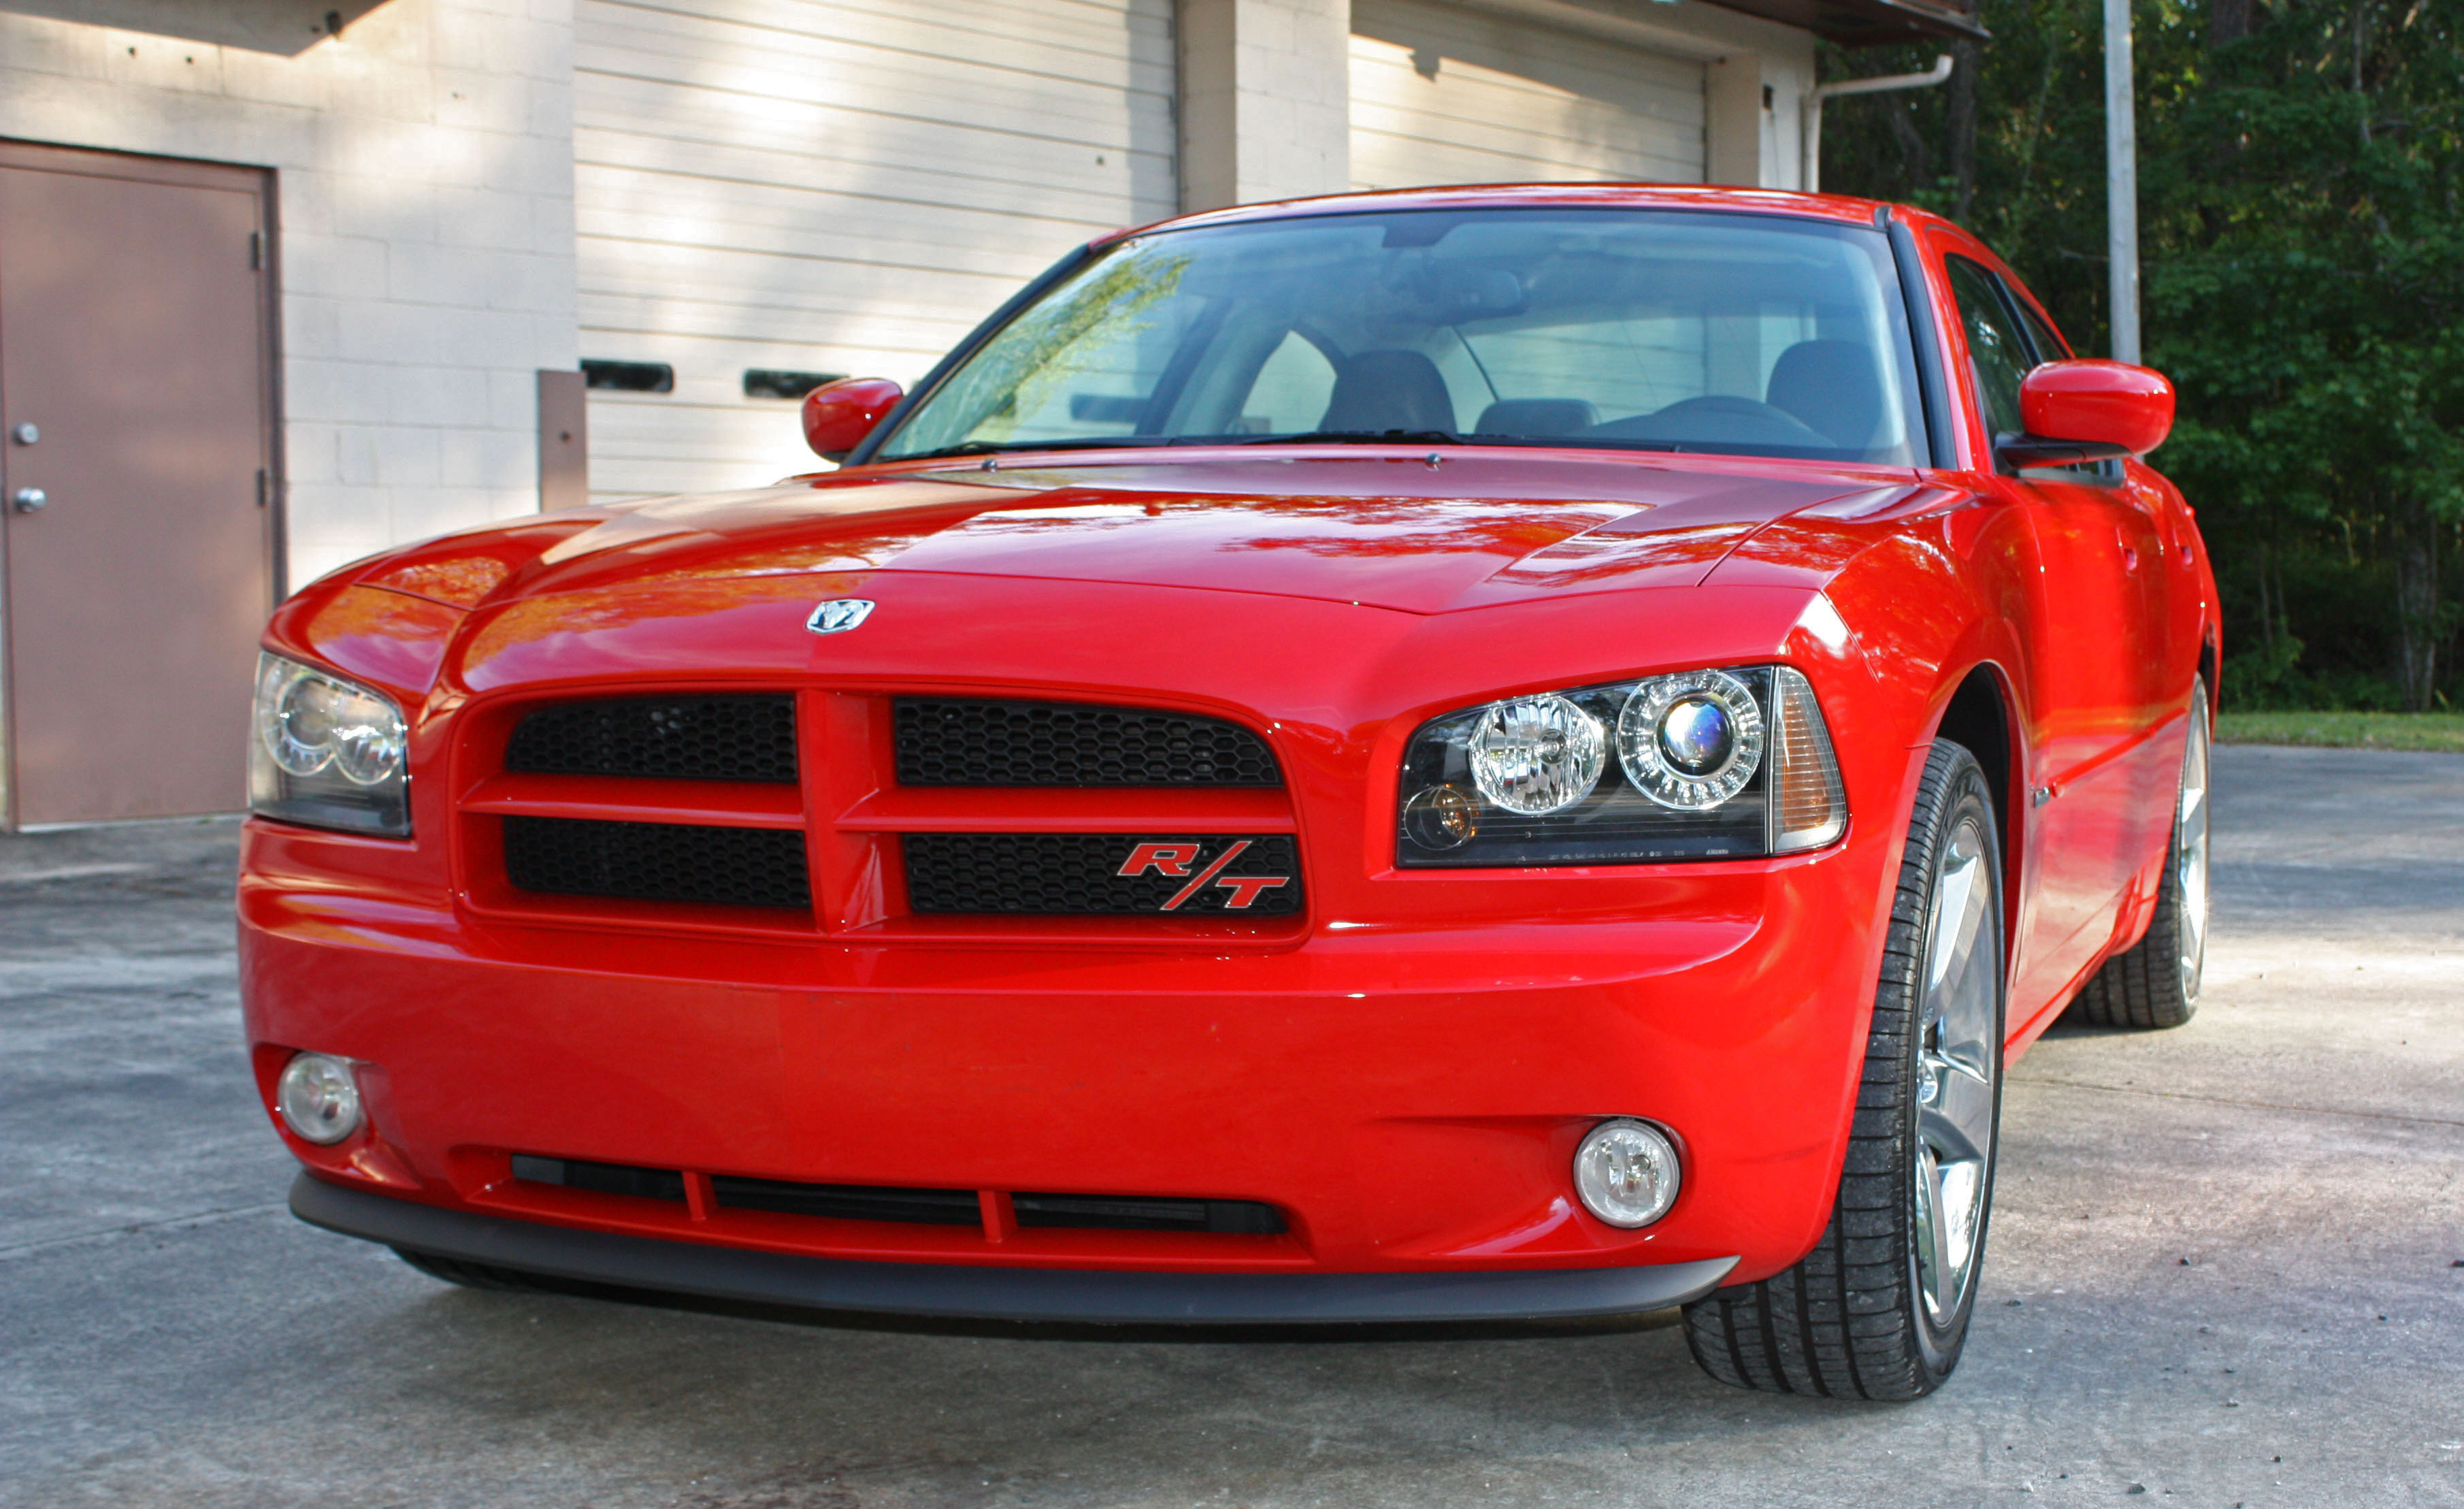 2010 Dodge Charger #14.